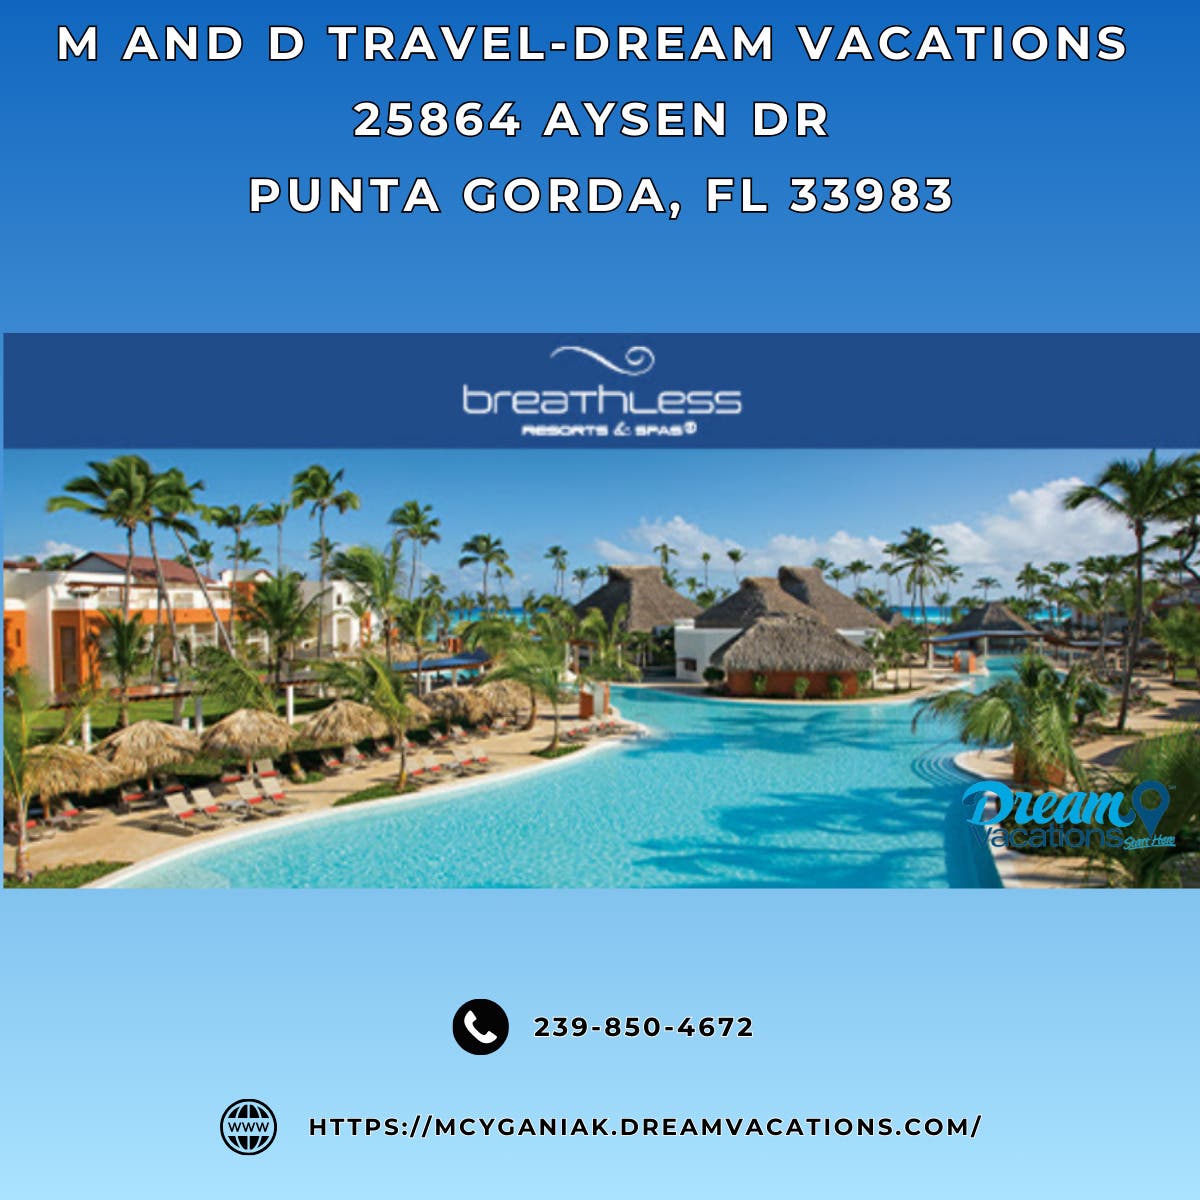 Travel Agency in Punta Gorda, FL - M and D Travel-Dream Vacations